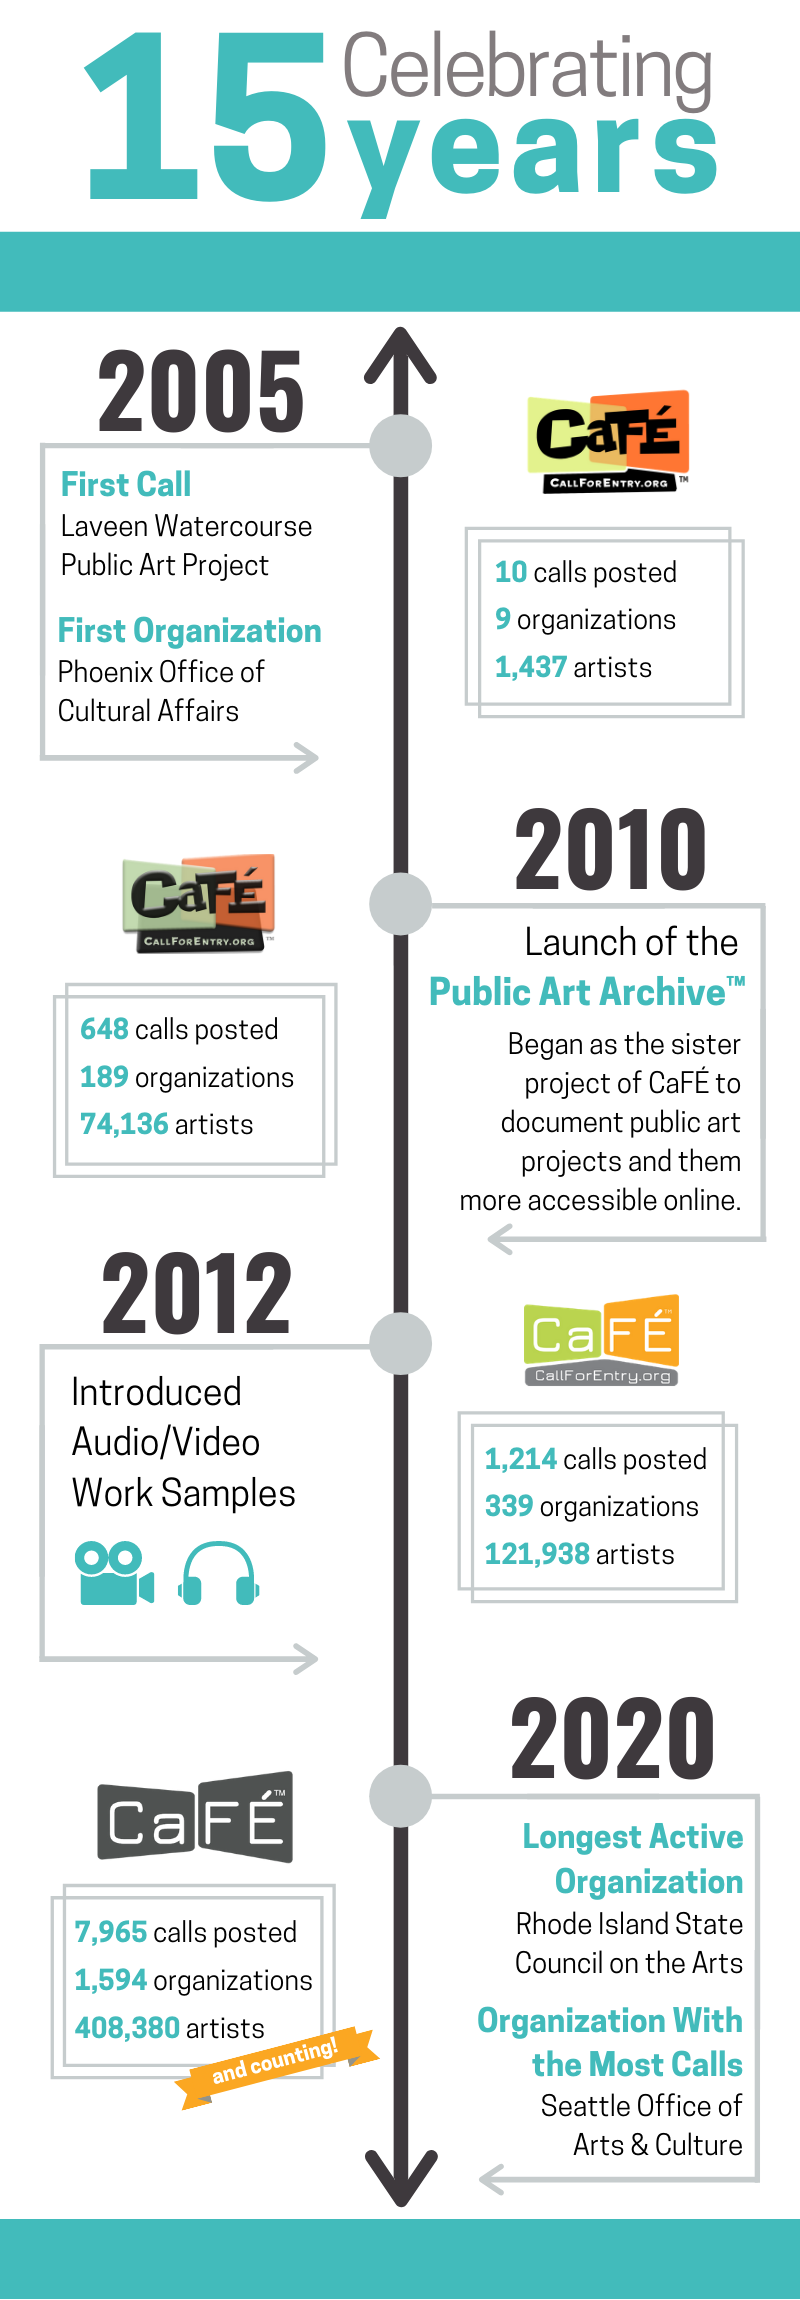 An infographic highlighting the work of CaFE. It starts in 2005 and goes up to 2020. Below the image is a text version of the timeline.